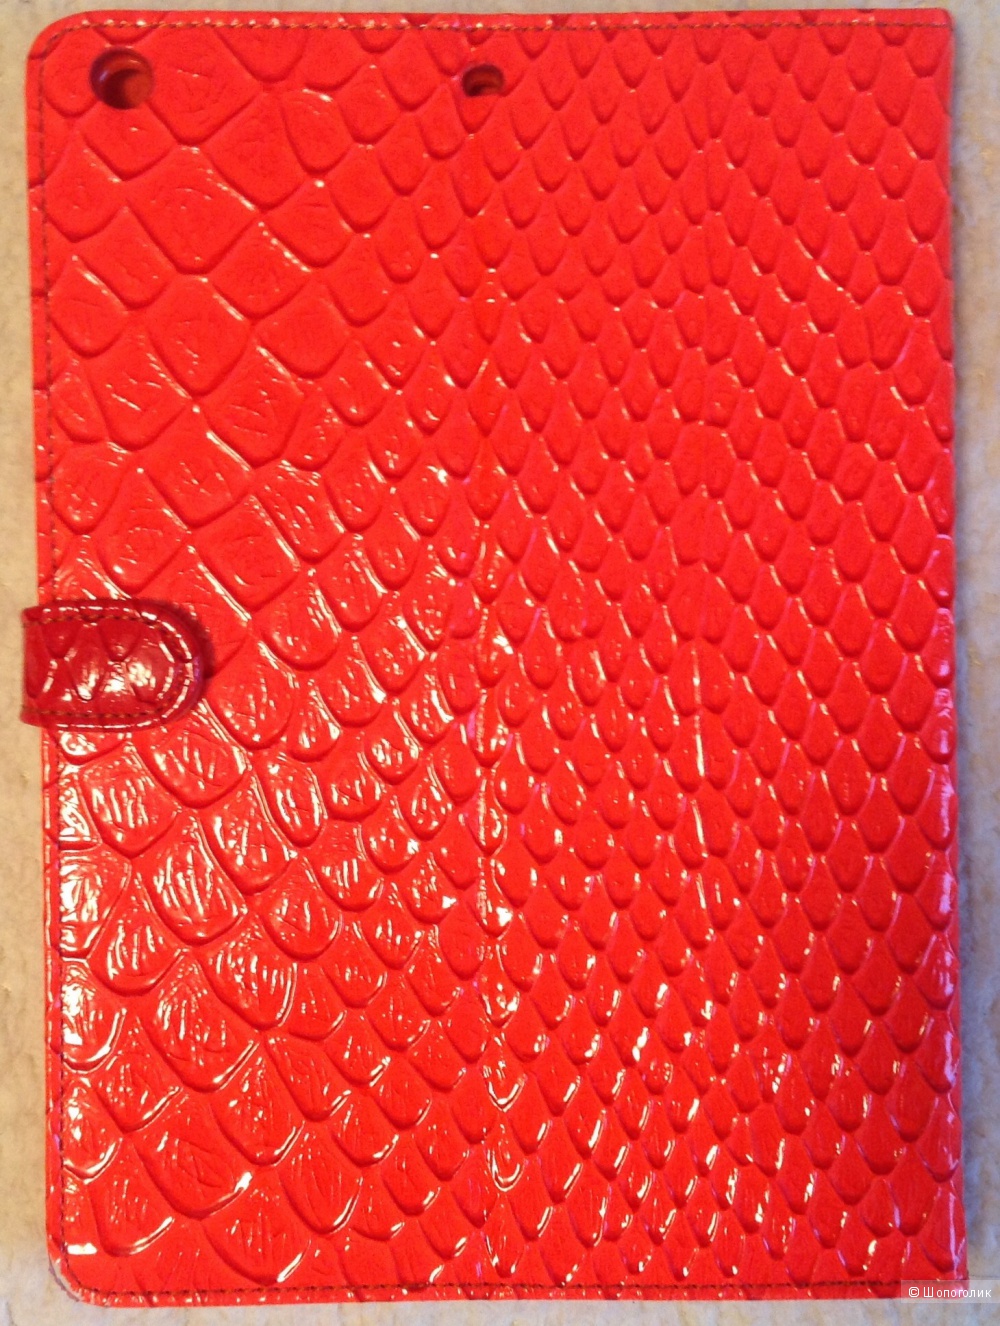 Marc by Marc Jacobs Jellysnake Colorblocked Tablet Book